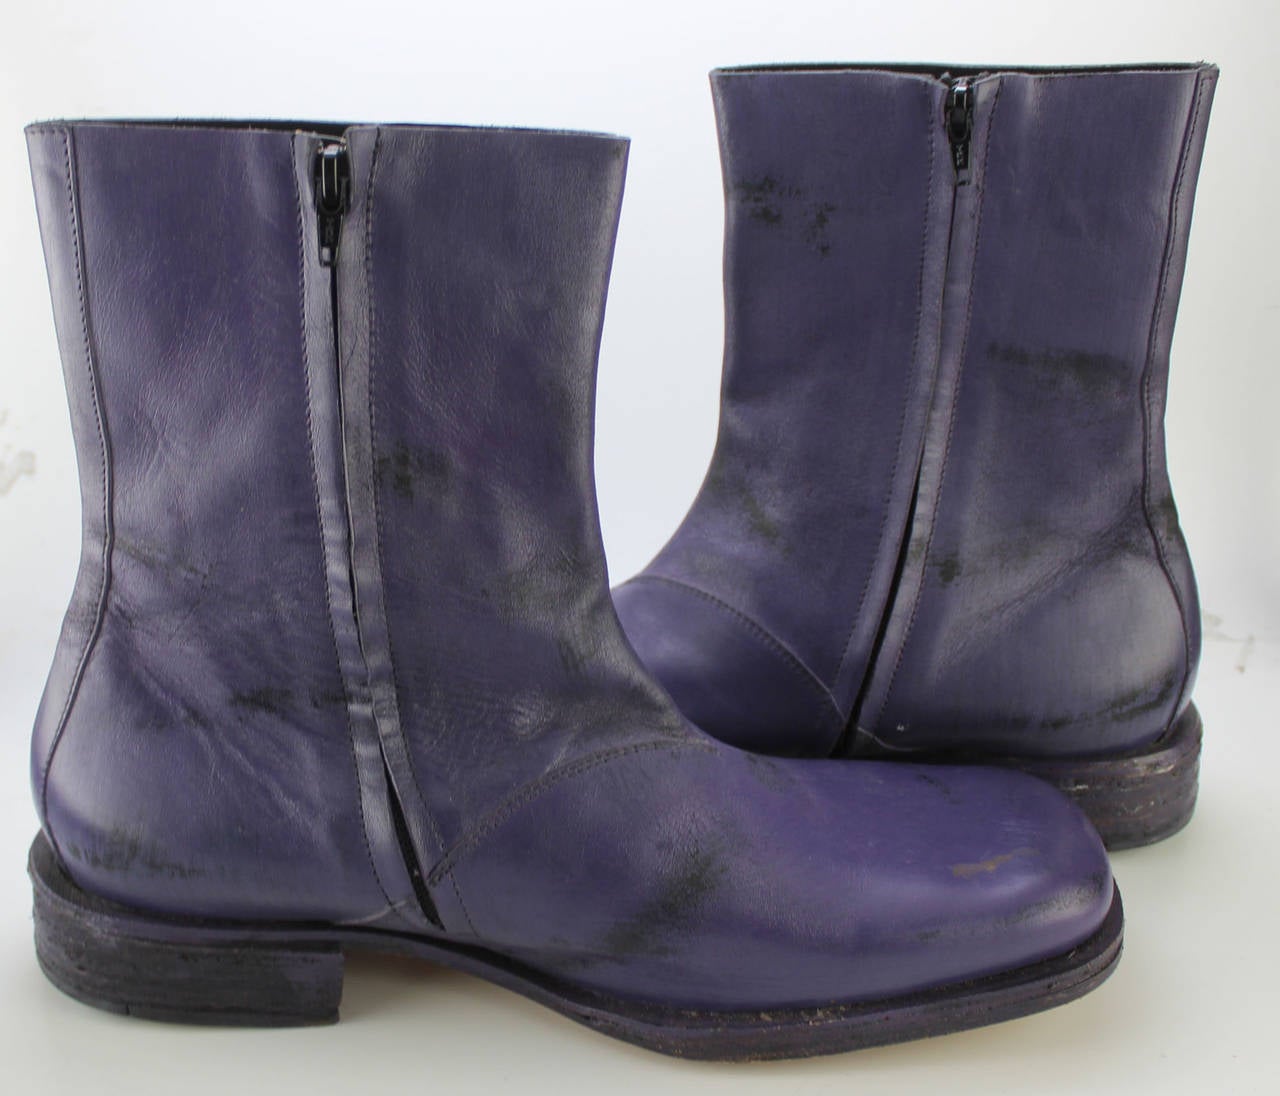 These boots were produced early on during Martin Margiela's designing years. They have his signature distressed leather painting. This particular pair has black over a dark purple. They have a square toe, side zipper, and a 1 1/2 inch rugged heel.